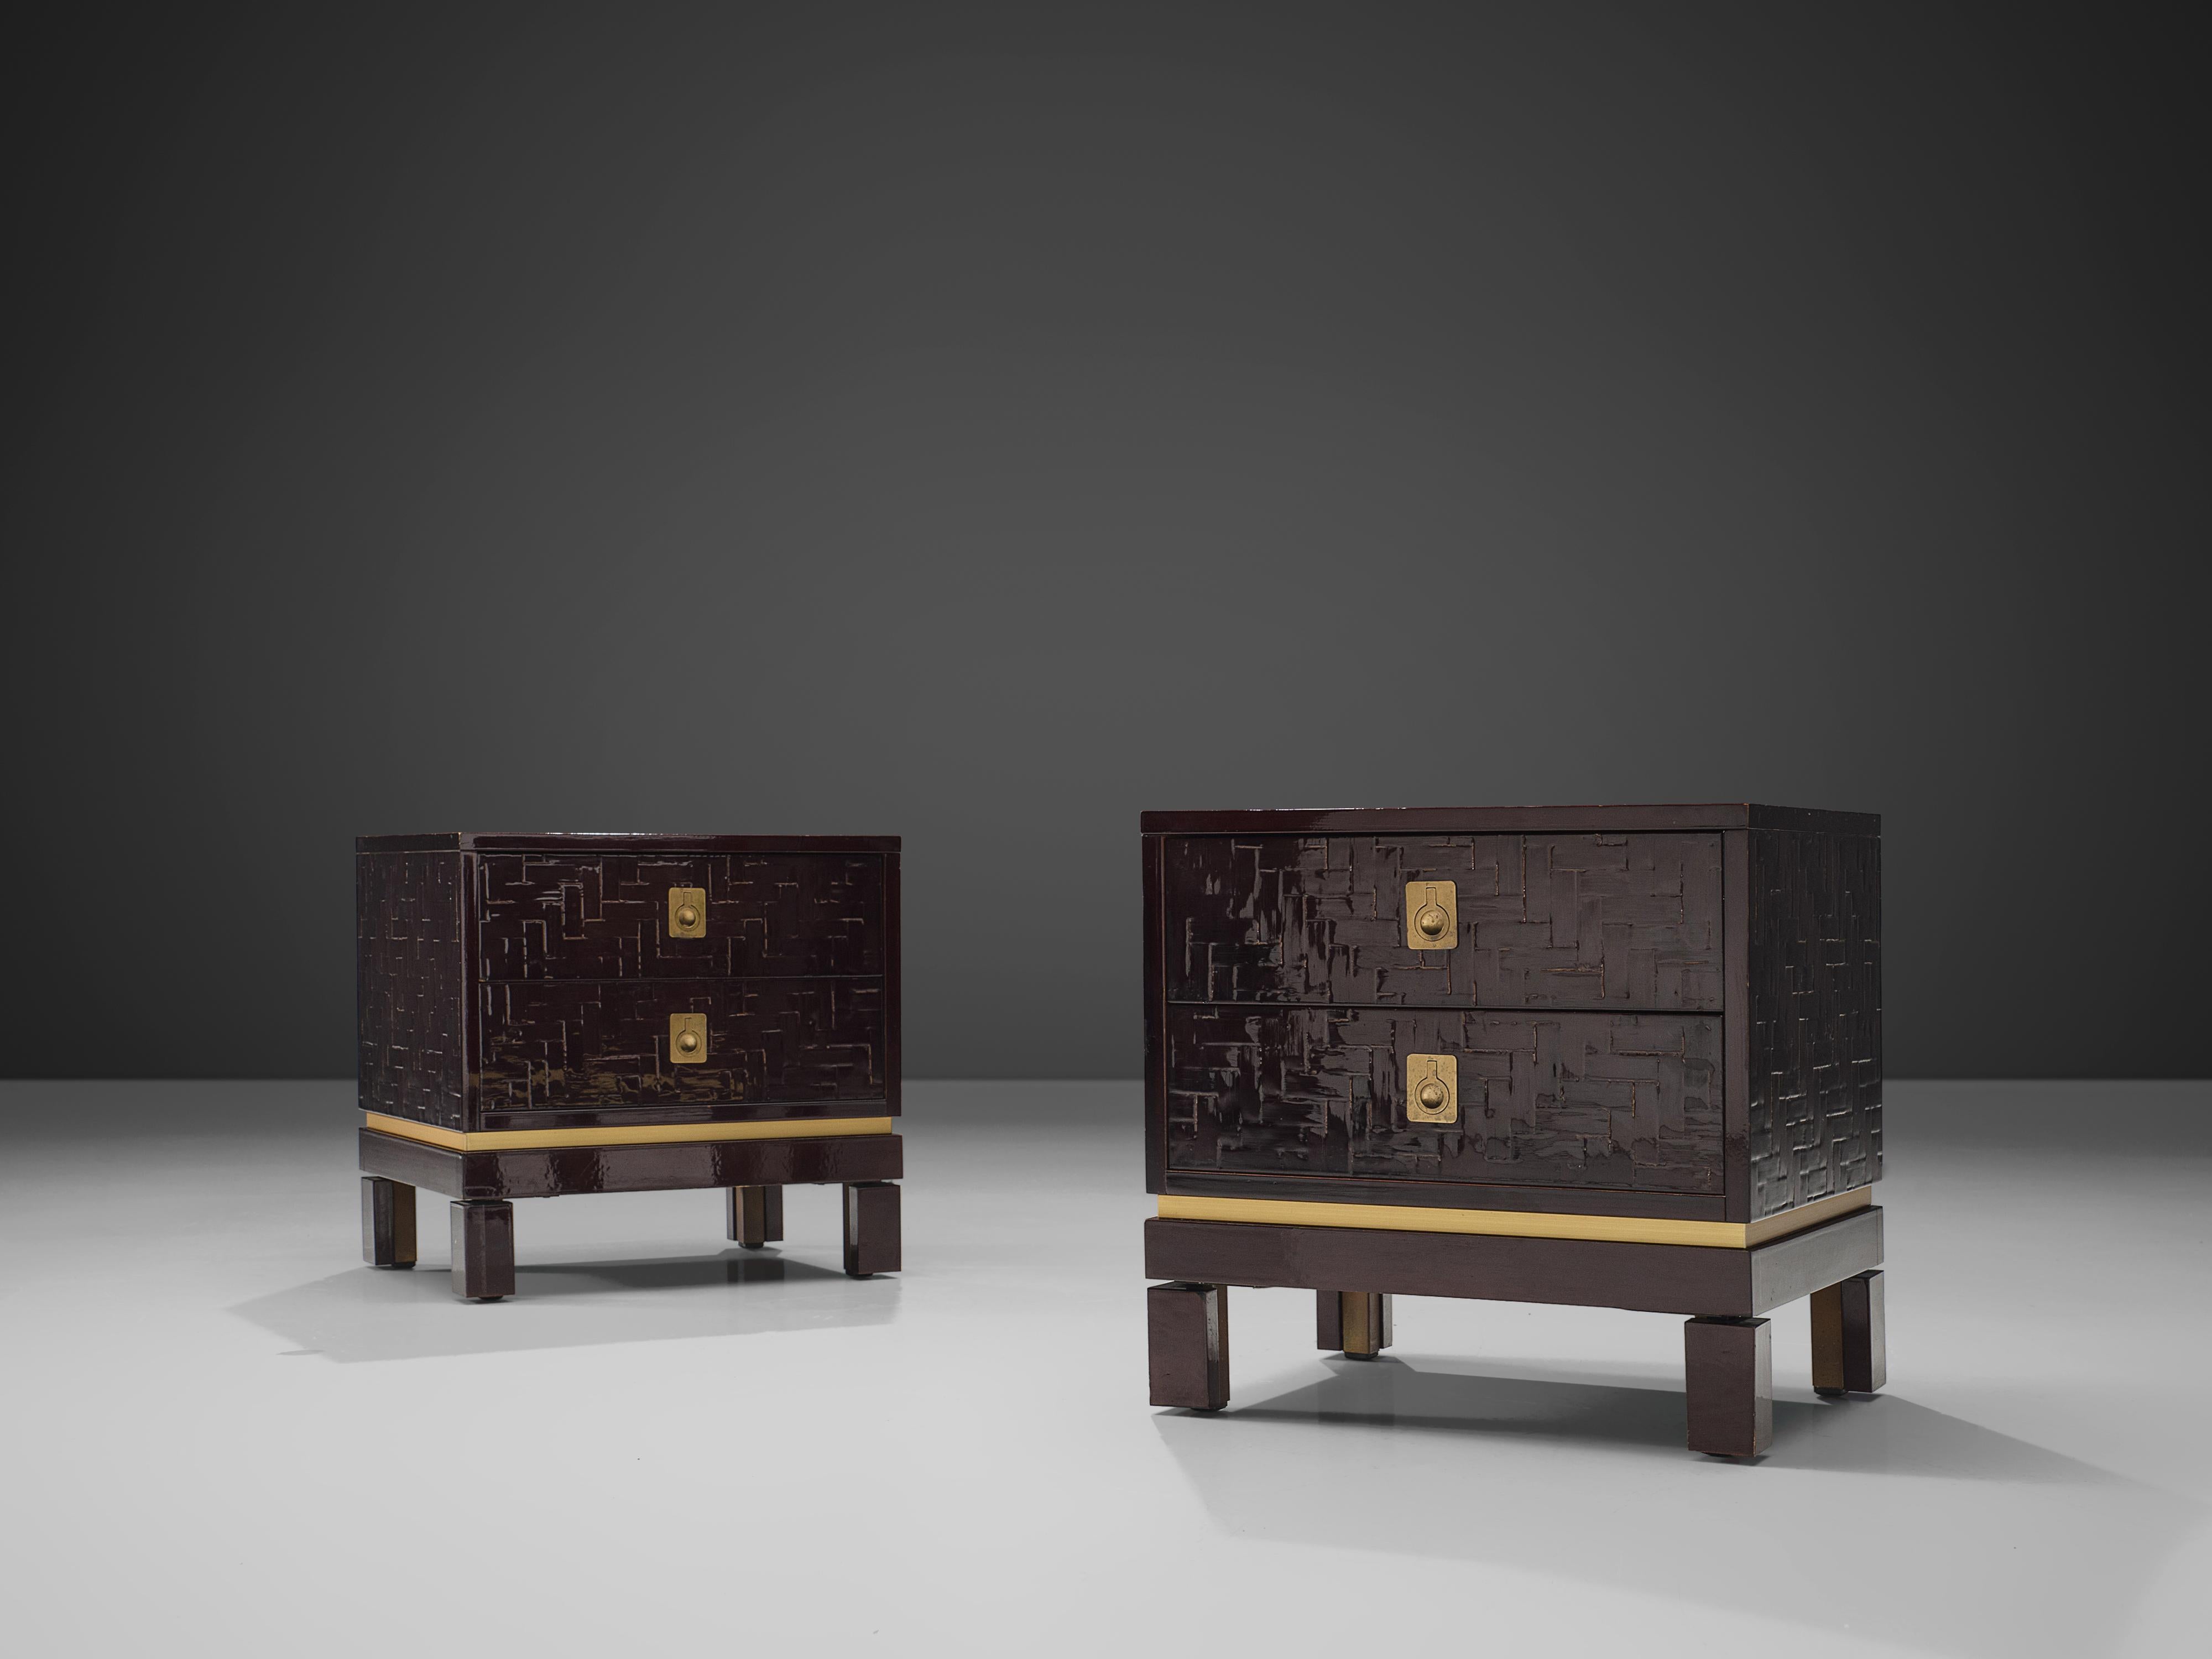 Pair of nightstands, lacquered wood, brass, Europe, 1960s.

These two lovely dark brown nightstands convince the viewer with their textured surface in combination with brass details. The cubic shape is structured with two drawers. With their dark